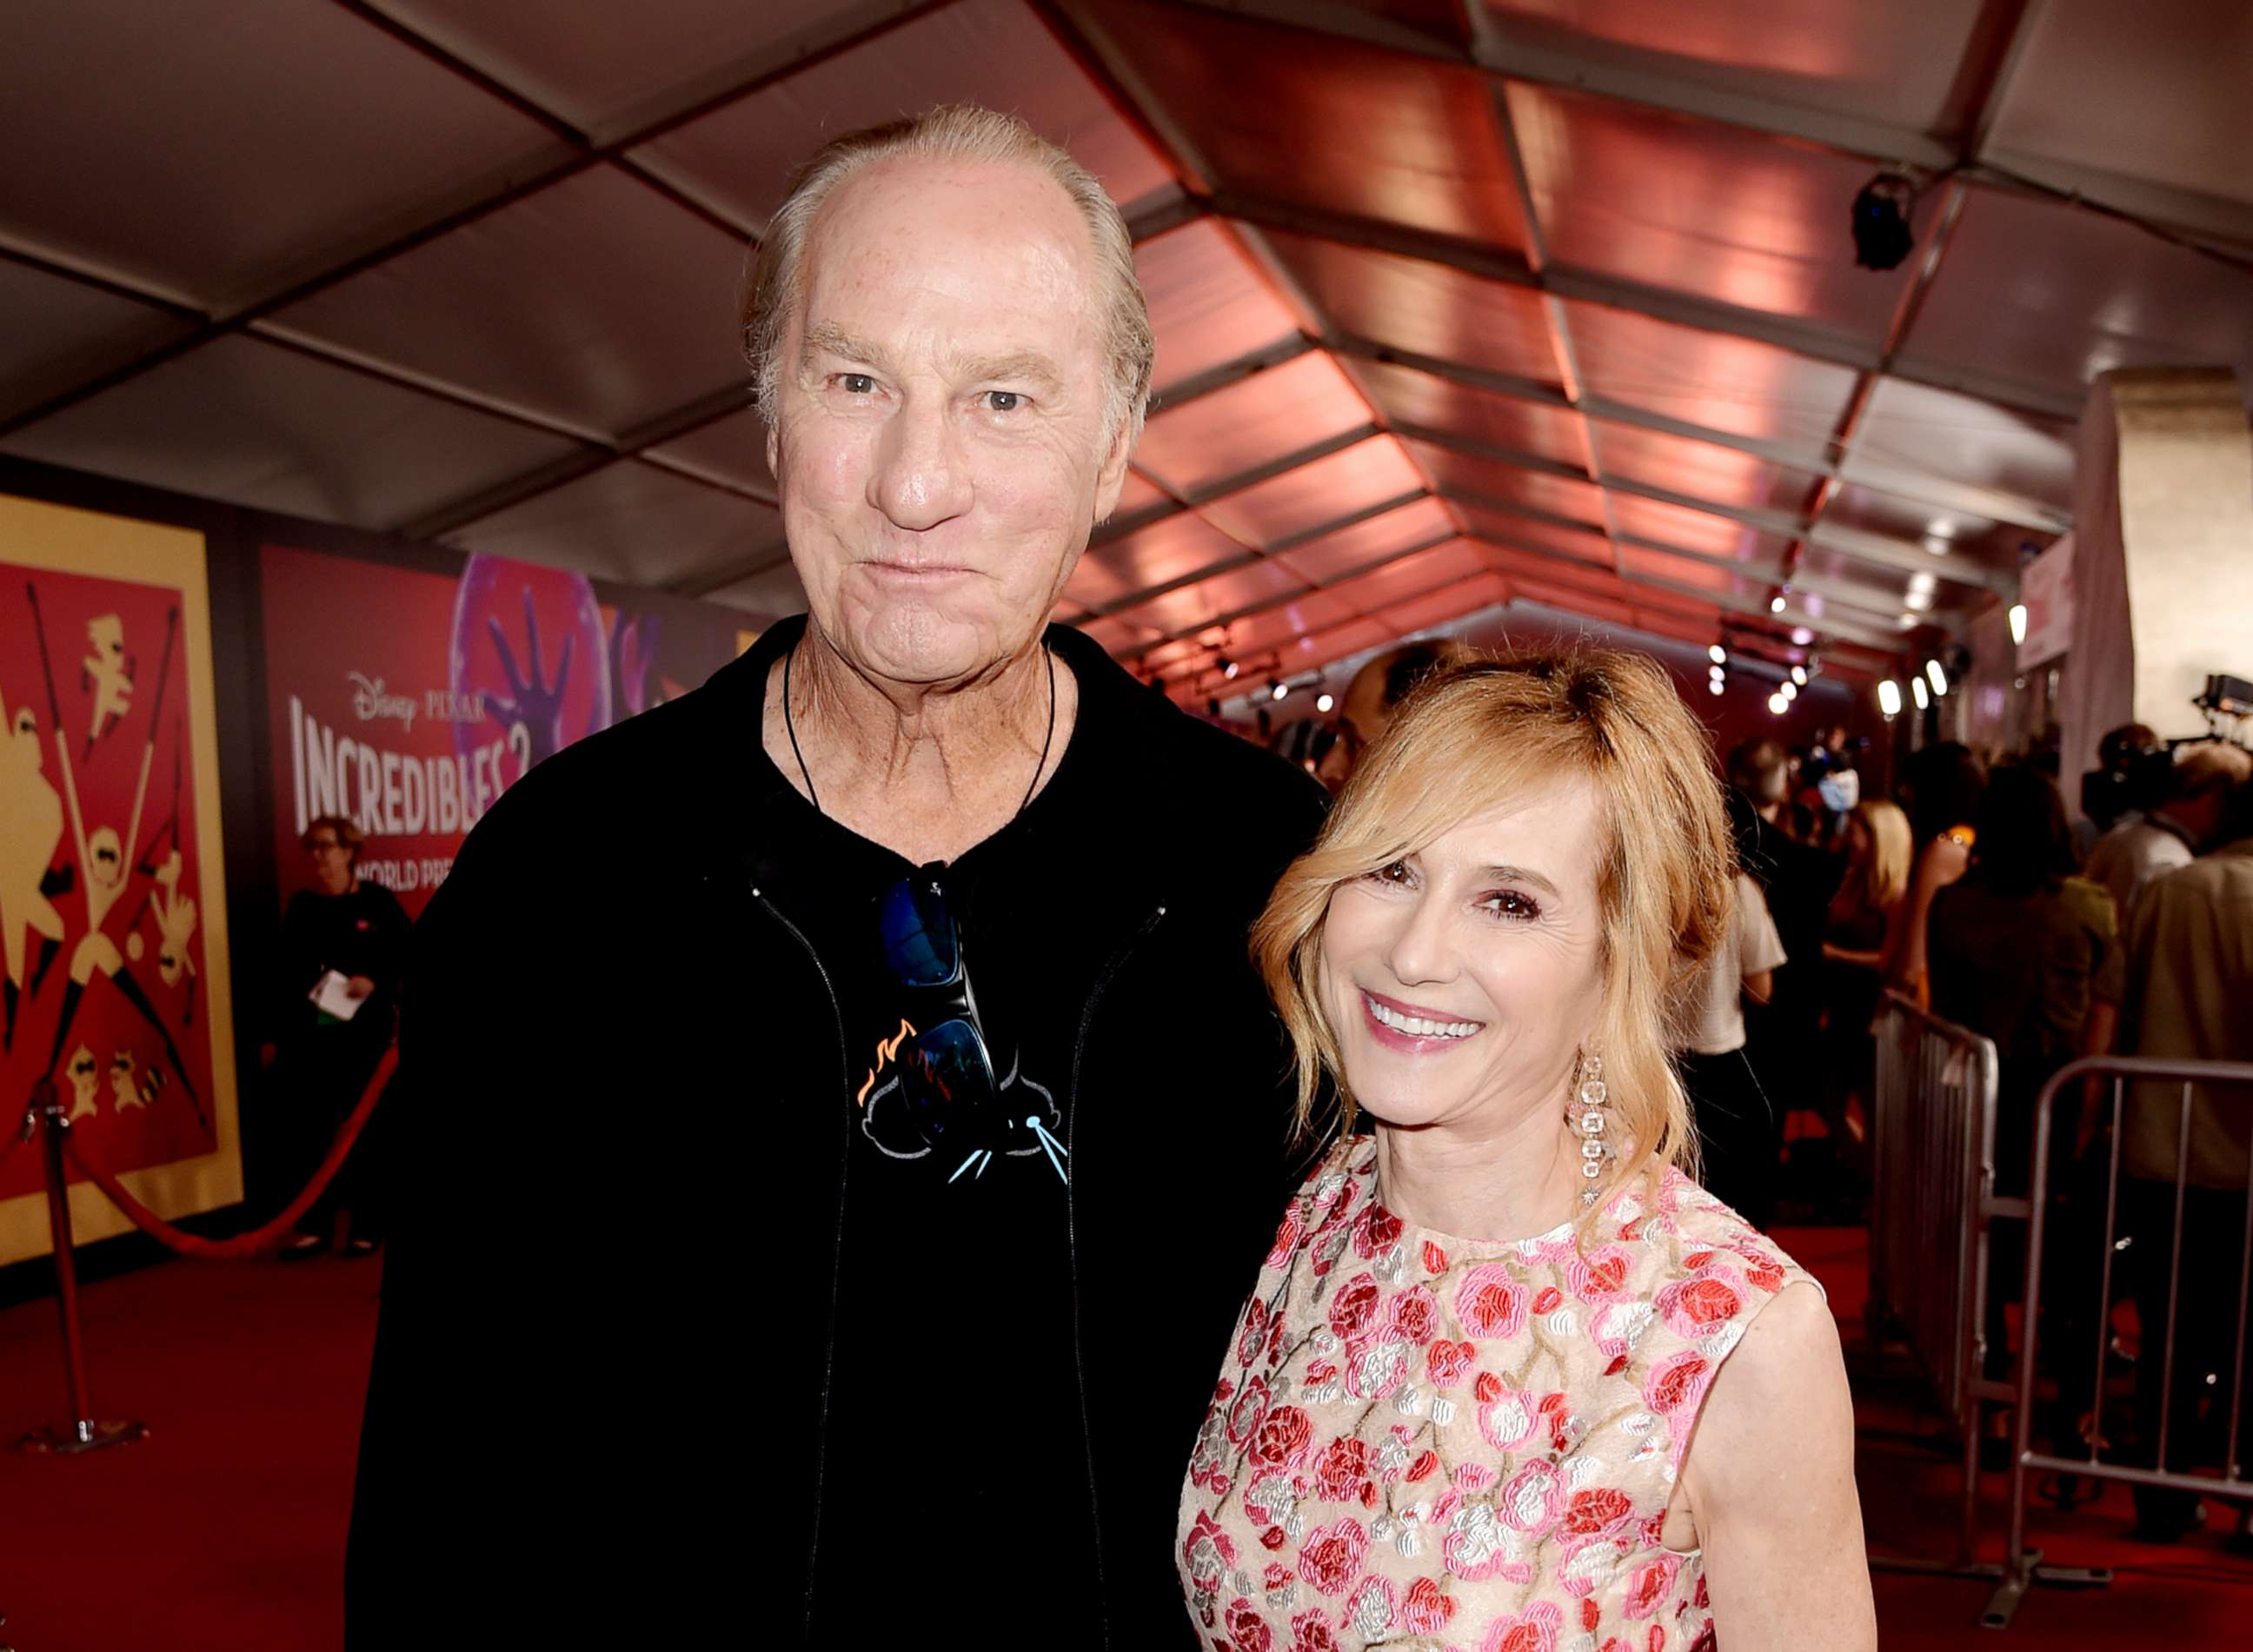 PHOTO: Craig T. Nelson and Holly Hunter attend the premiere of Disney and Pixar's "Incredibles 2" on June 5, 2018, in Los Angeles.